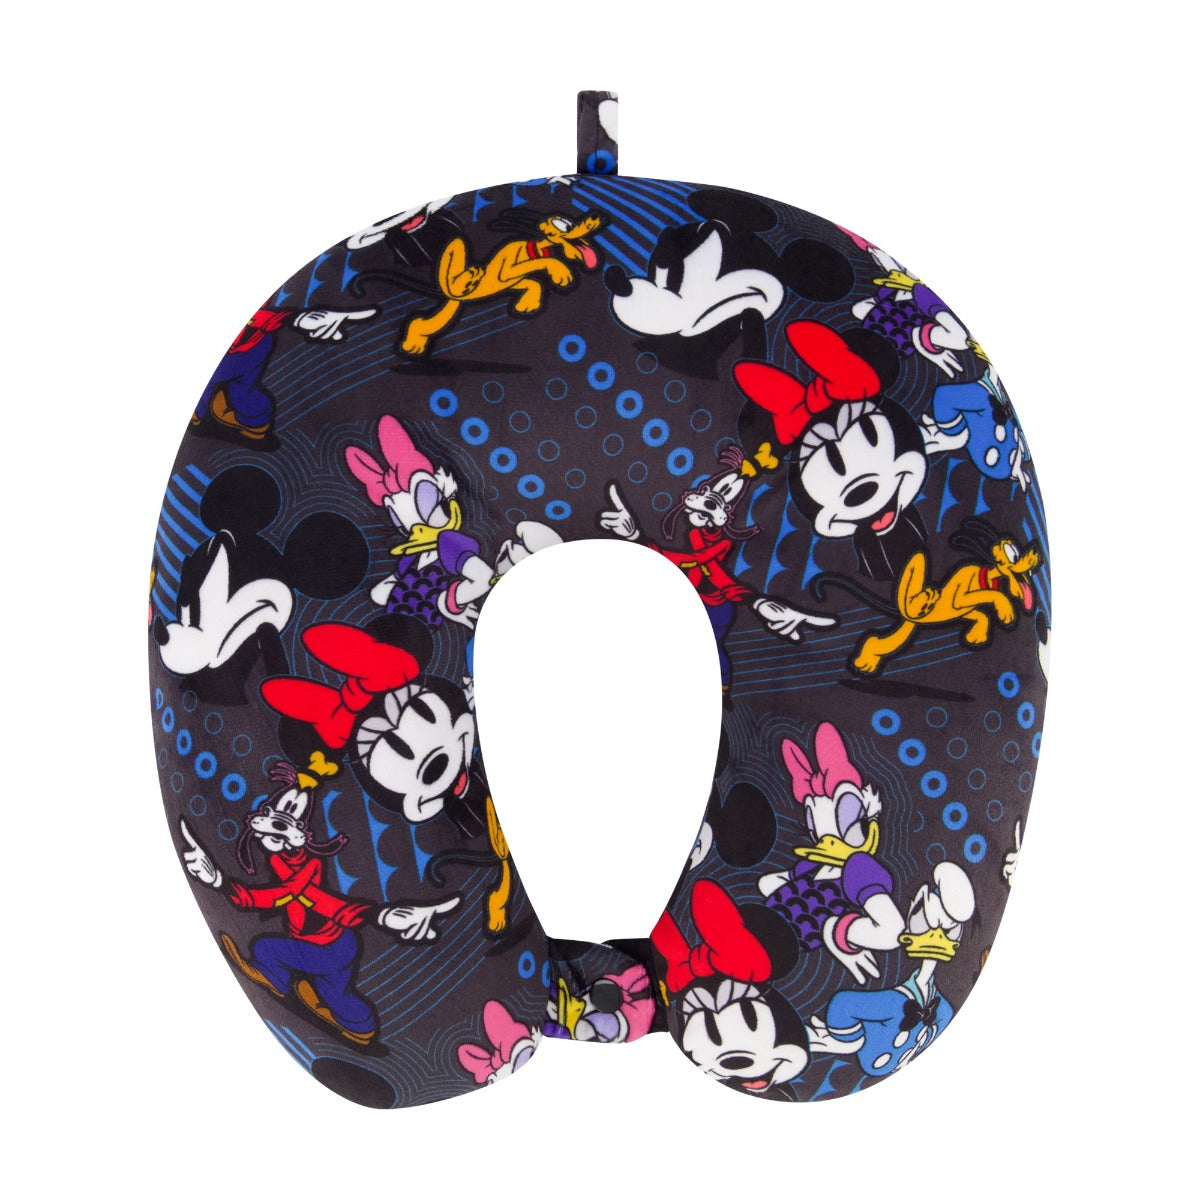 Ful Disney Mickey and friends neck pillow black blue - best travel pillows for necks